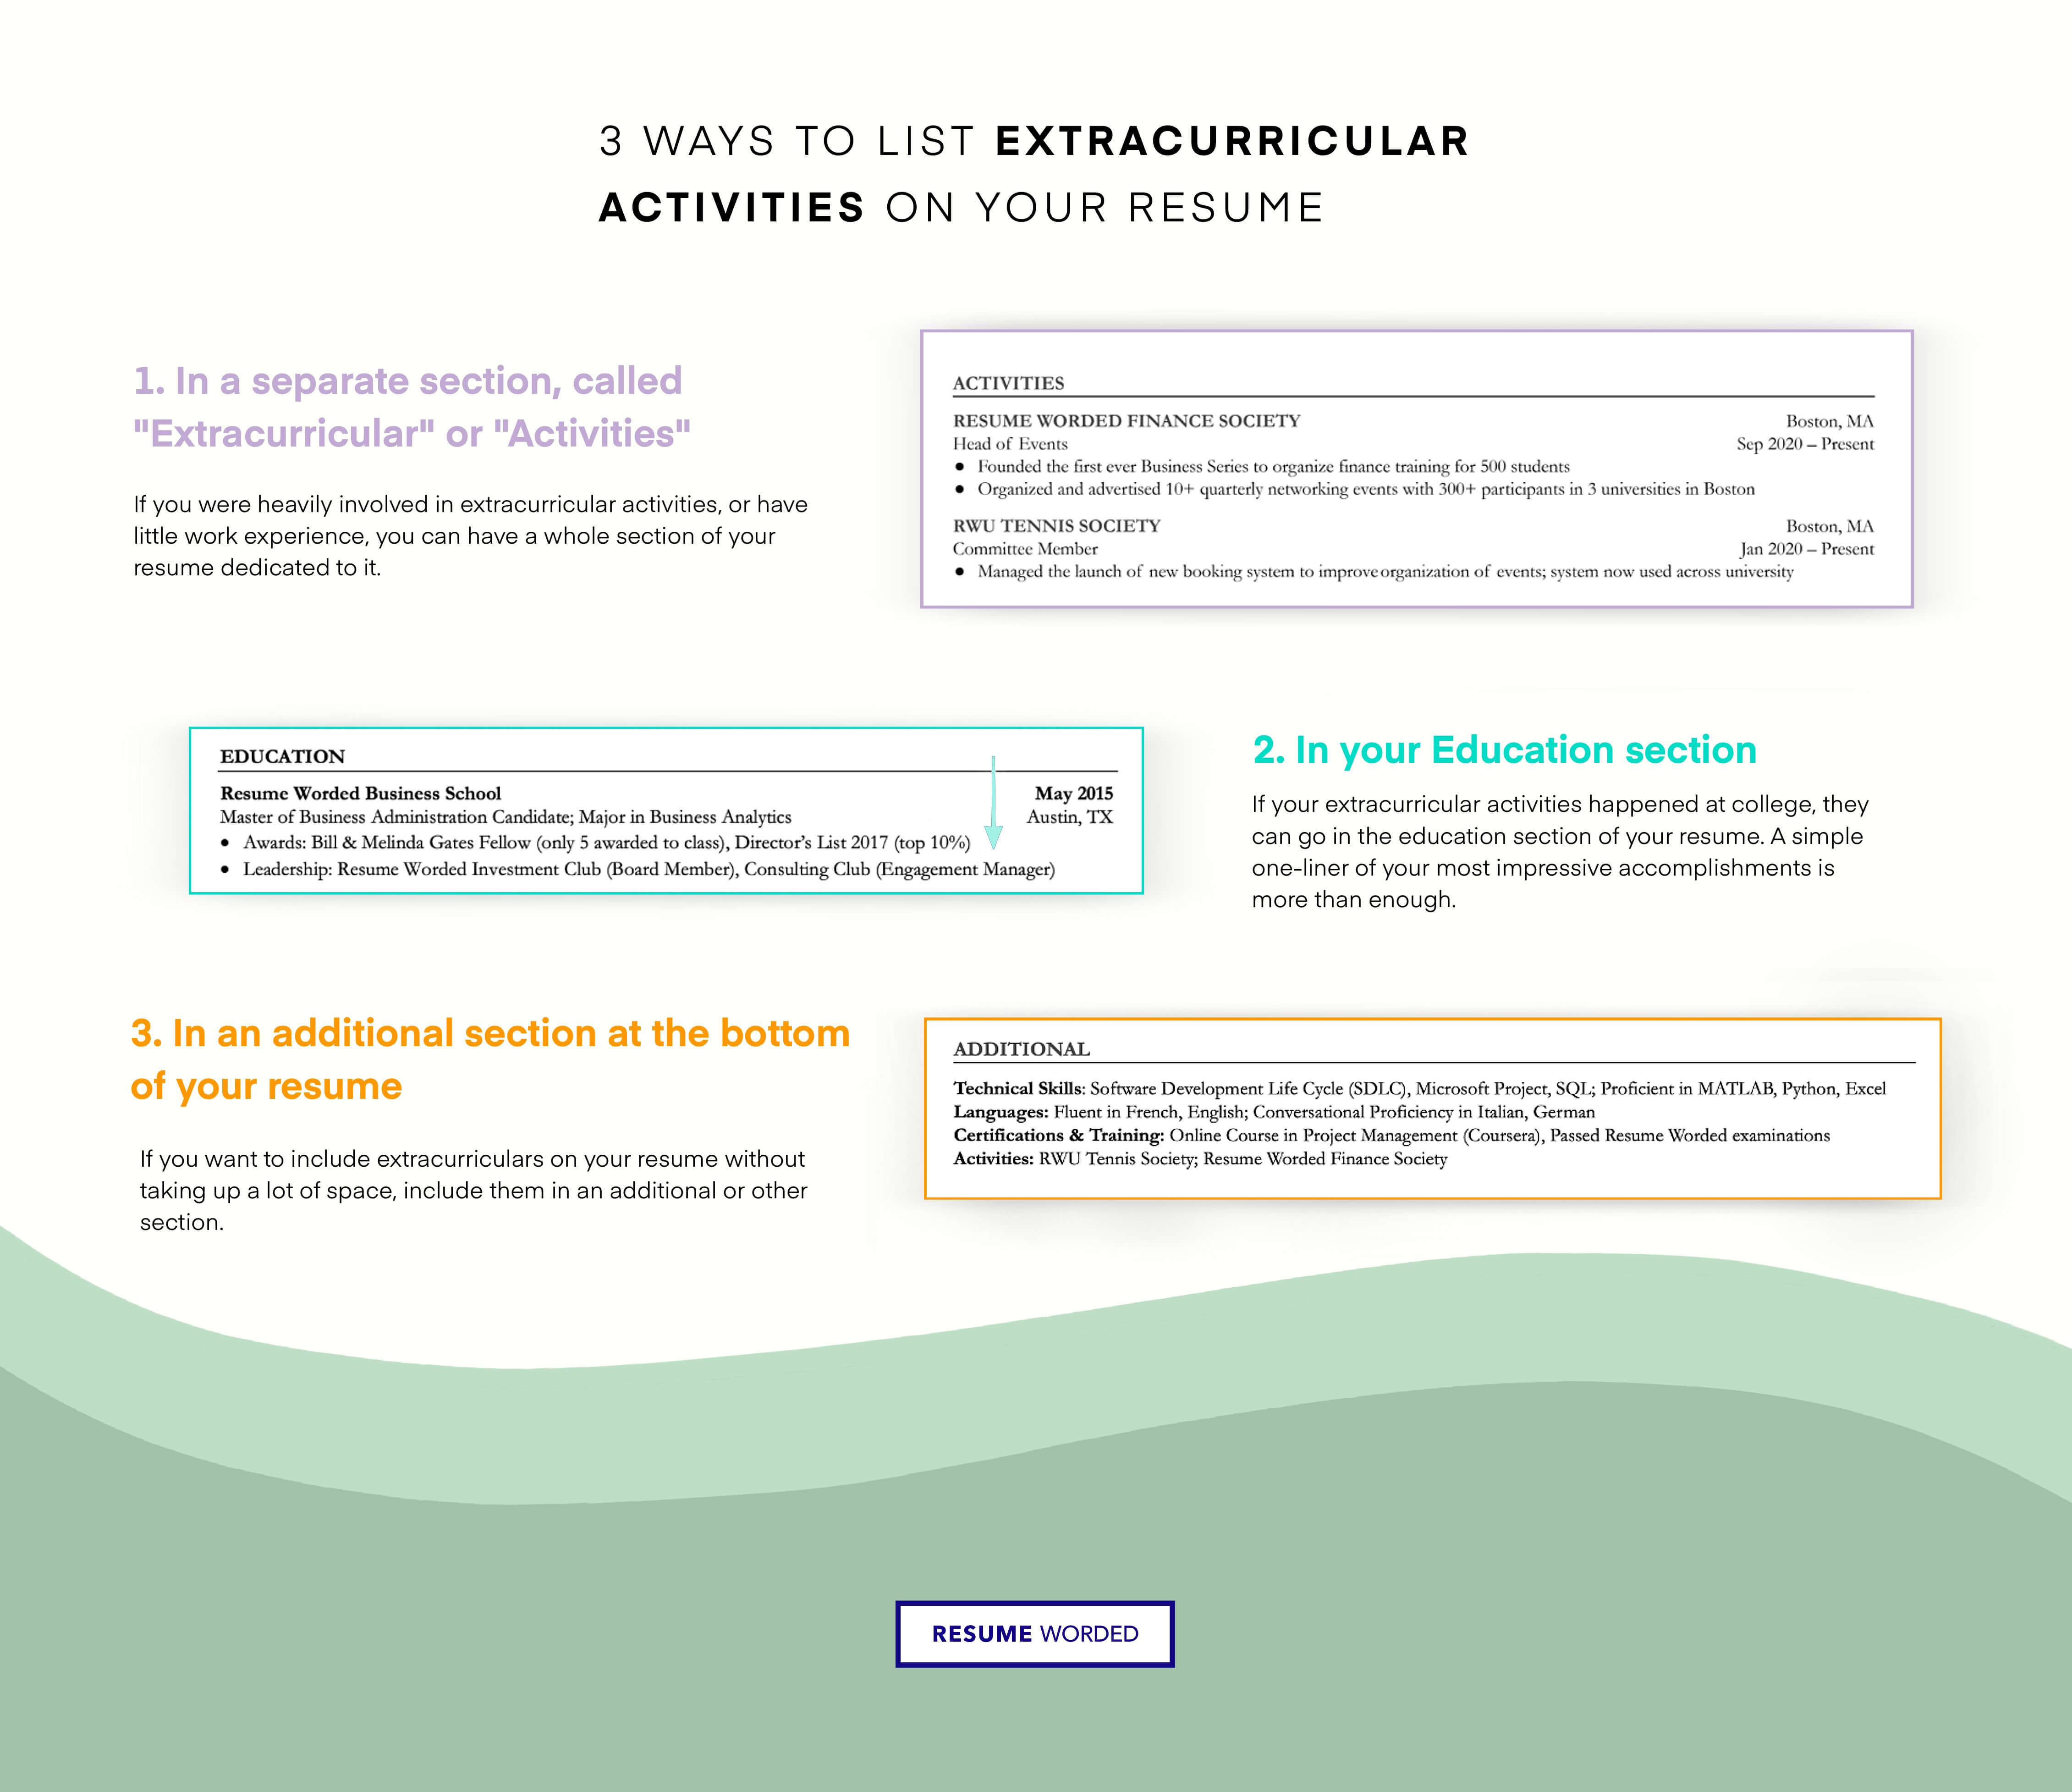 3 ways to list extracurricular experience